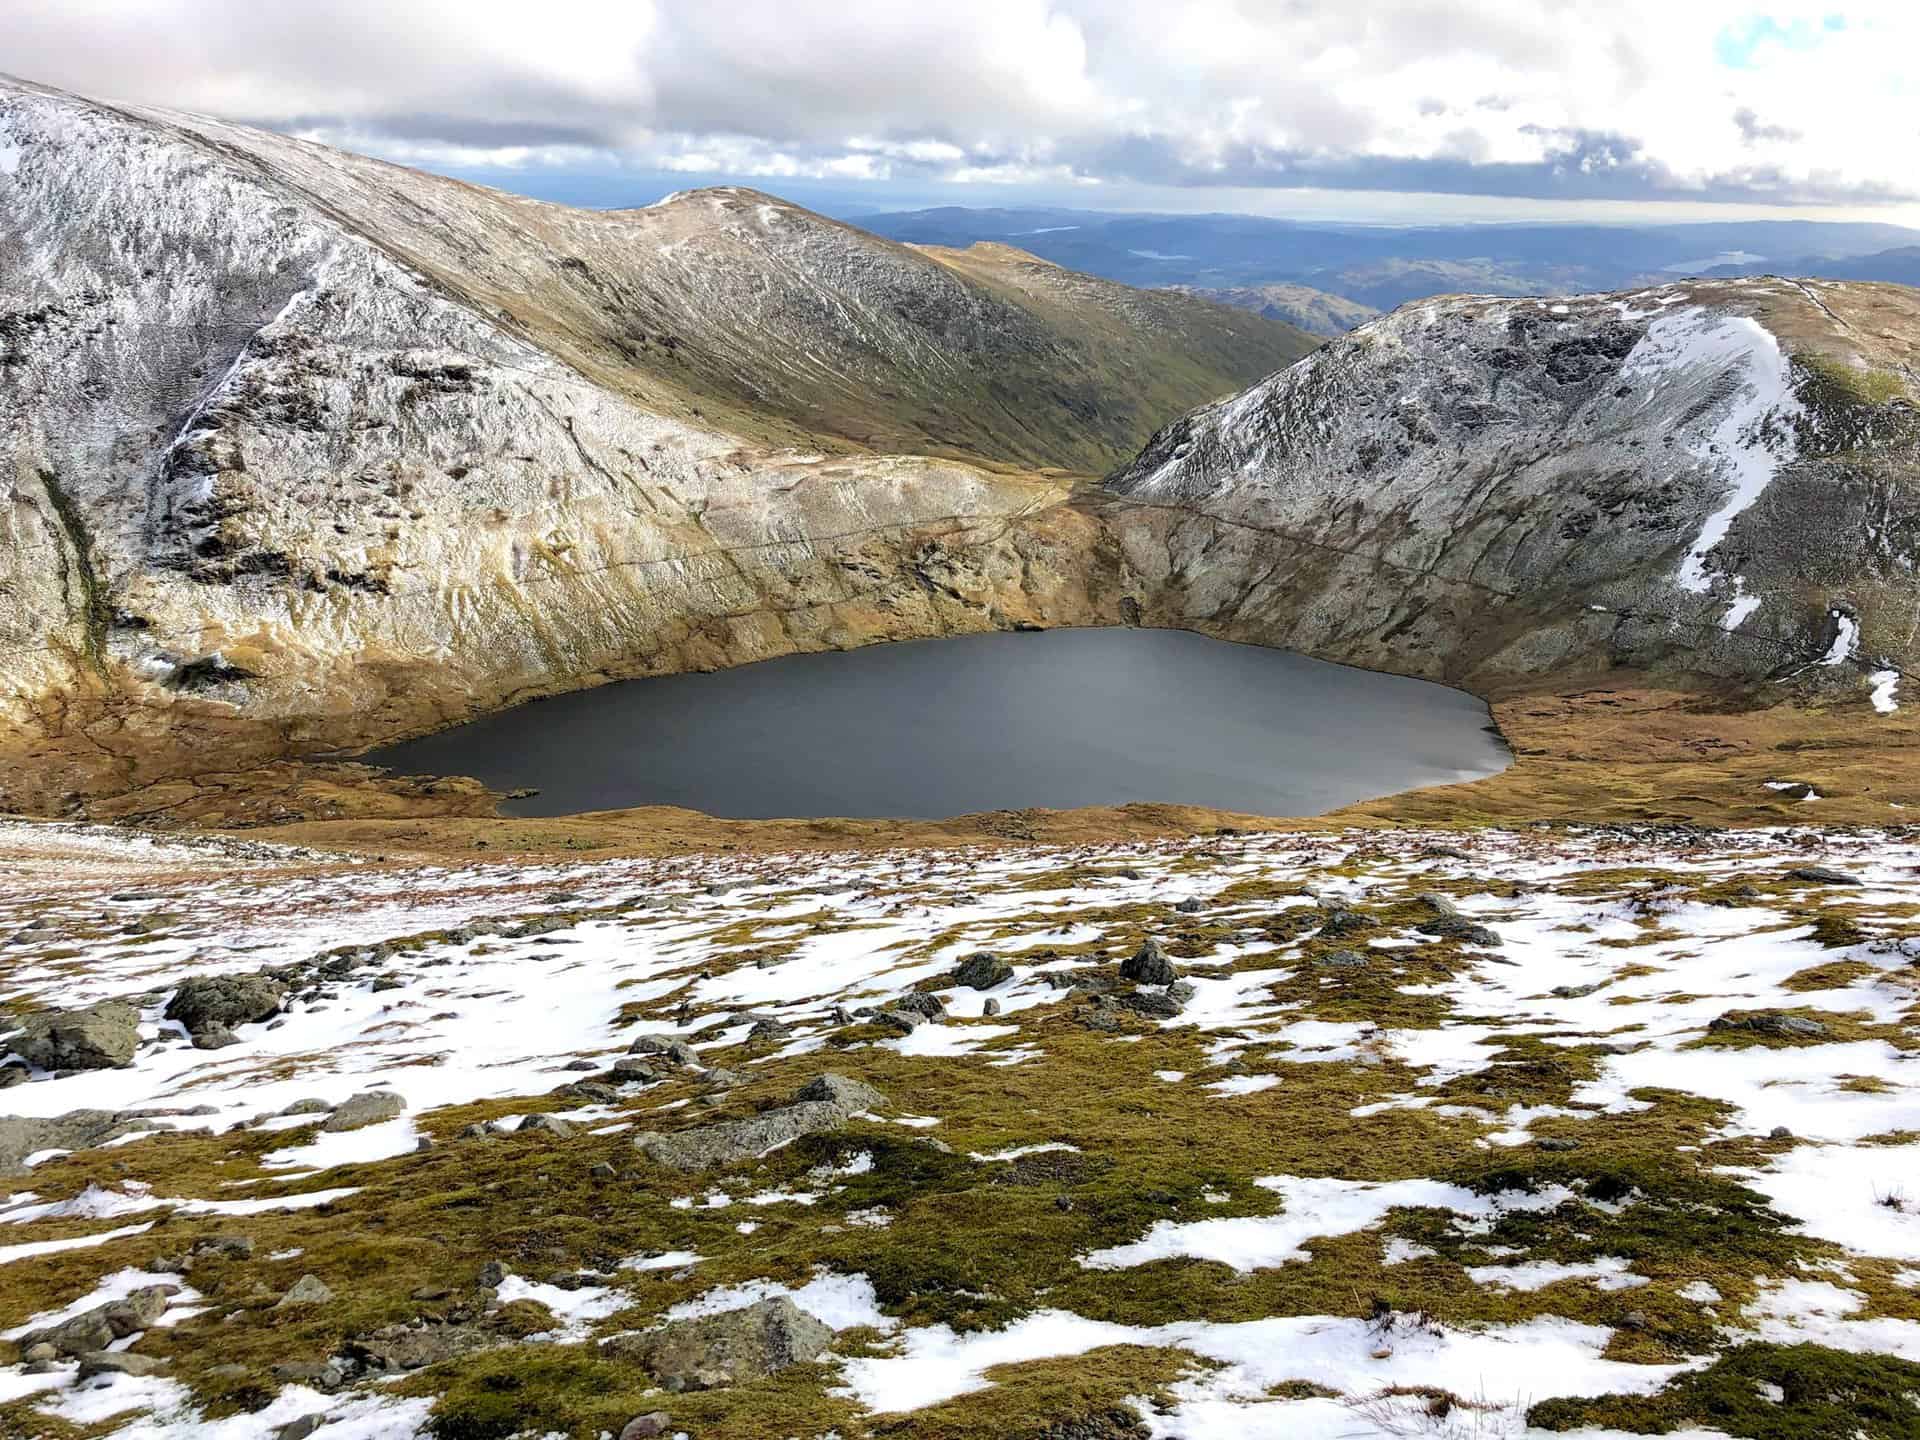 Grisedale Tarn's serene waters mark a tranquil spot on our walk.